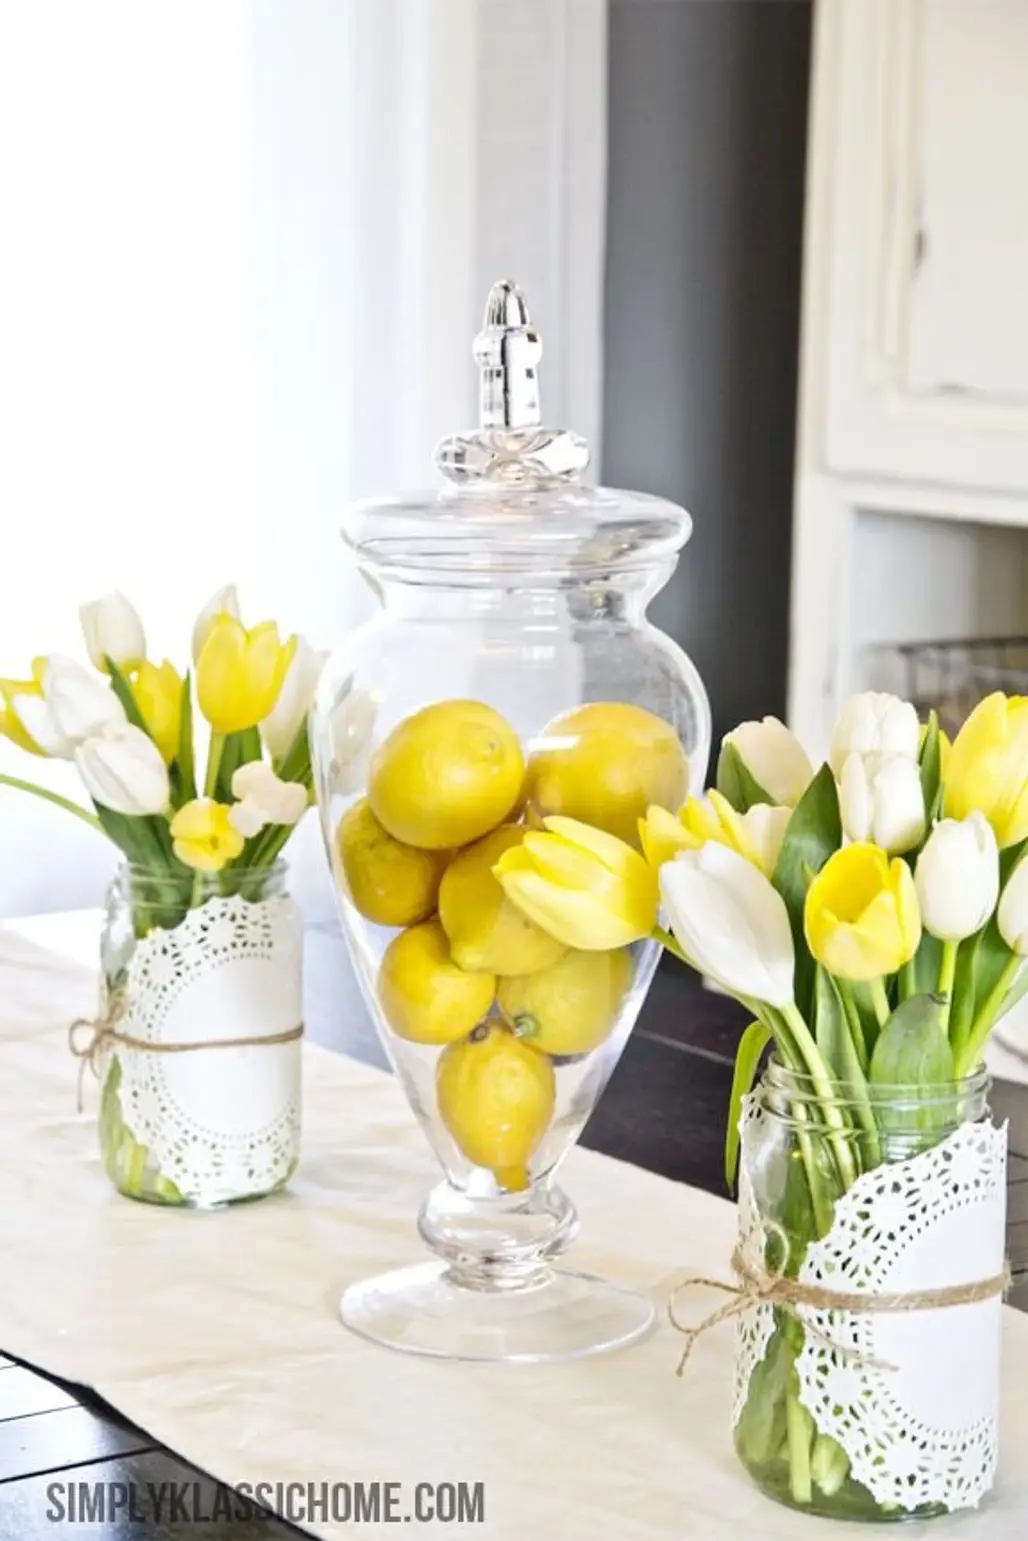 Easy, Bright, and Cheery Centerpiece